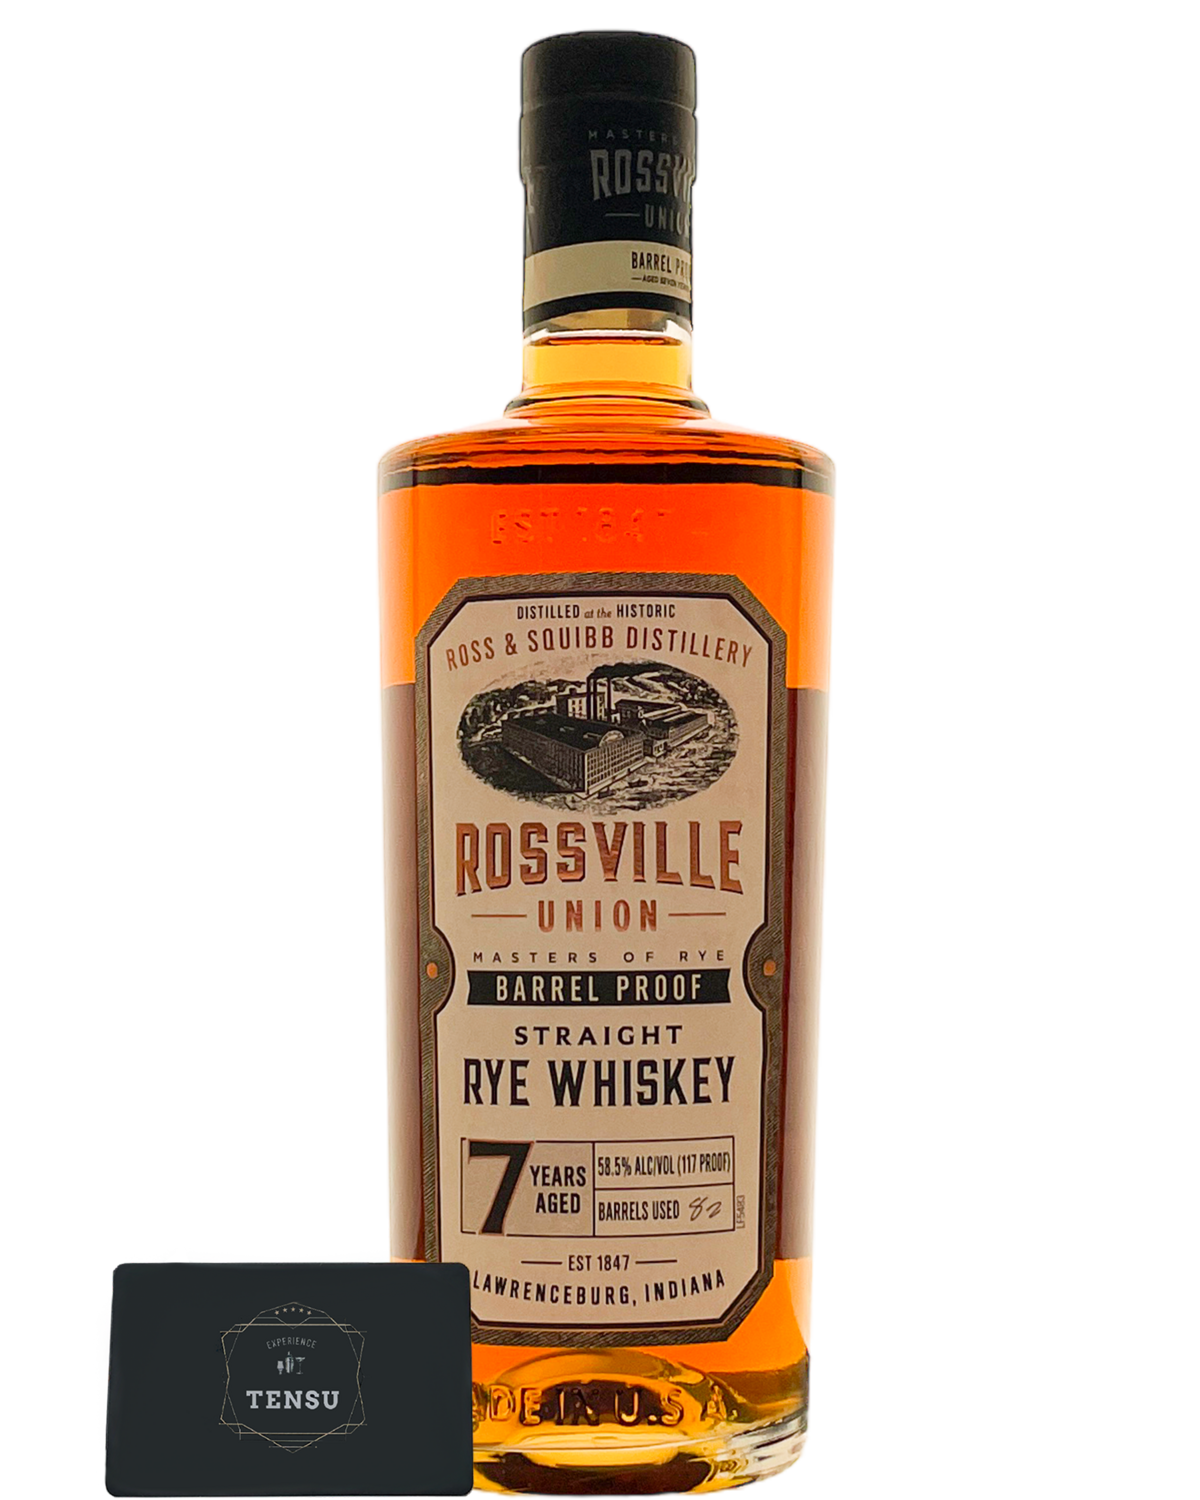 Rossville Union 7Y Barrel Proof -Straight Rye Whiskey- 58.5 "OB"